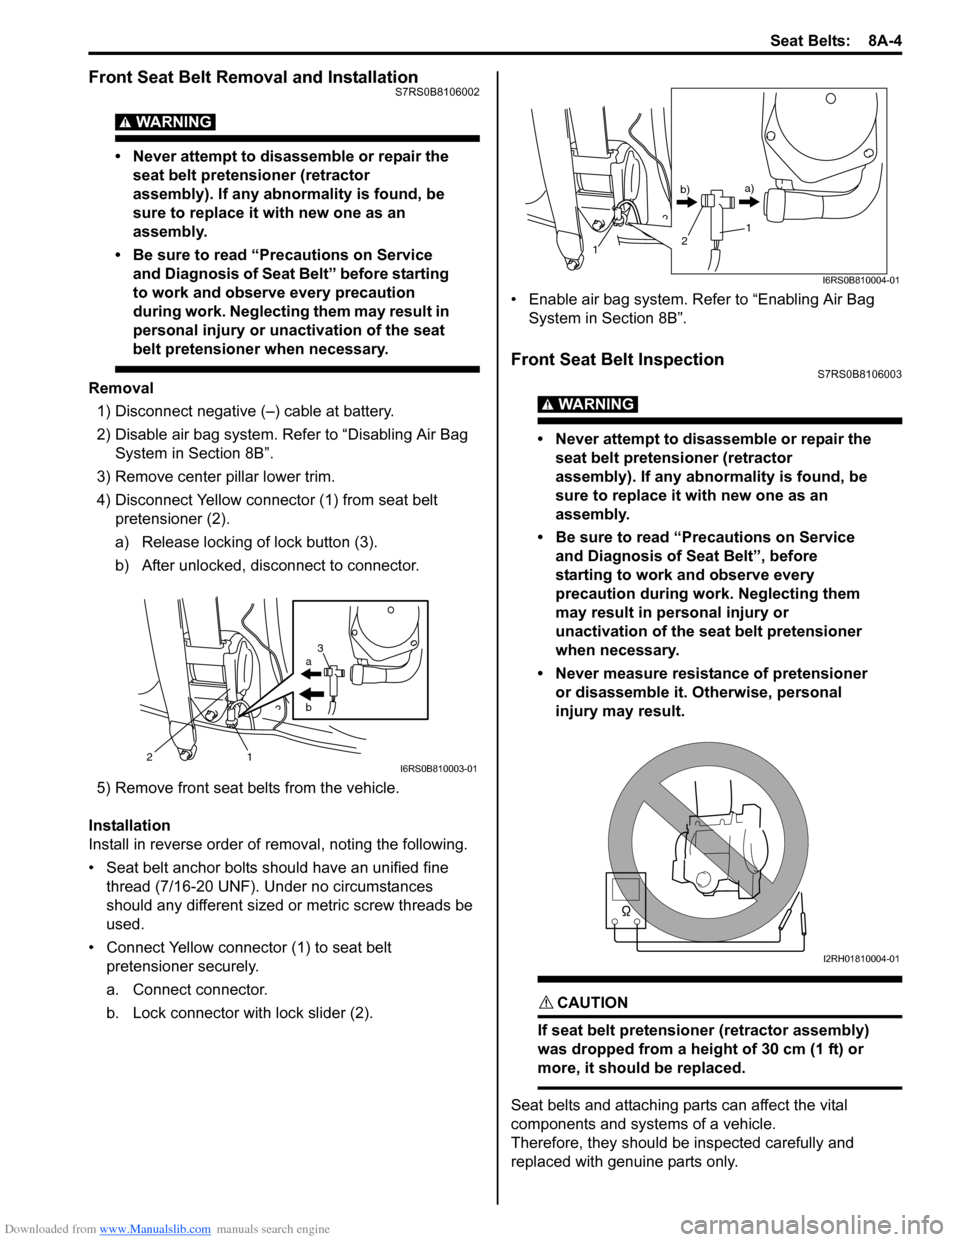 SUZUKI SWIFT 2007 2.G Service Service Manual Downloaded from www.Manualslib.com manuals search engine Seat Belts:  8A-4
Front Seat Belt Removal and InstallationS7RS0B8106002
WARNING! 
• Never attempt to disassemble or repair the seat belt pret